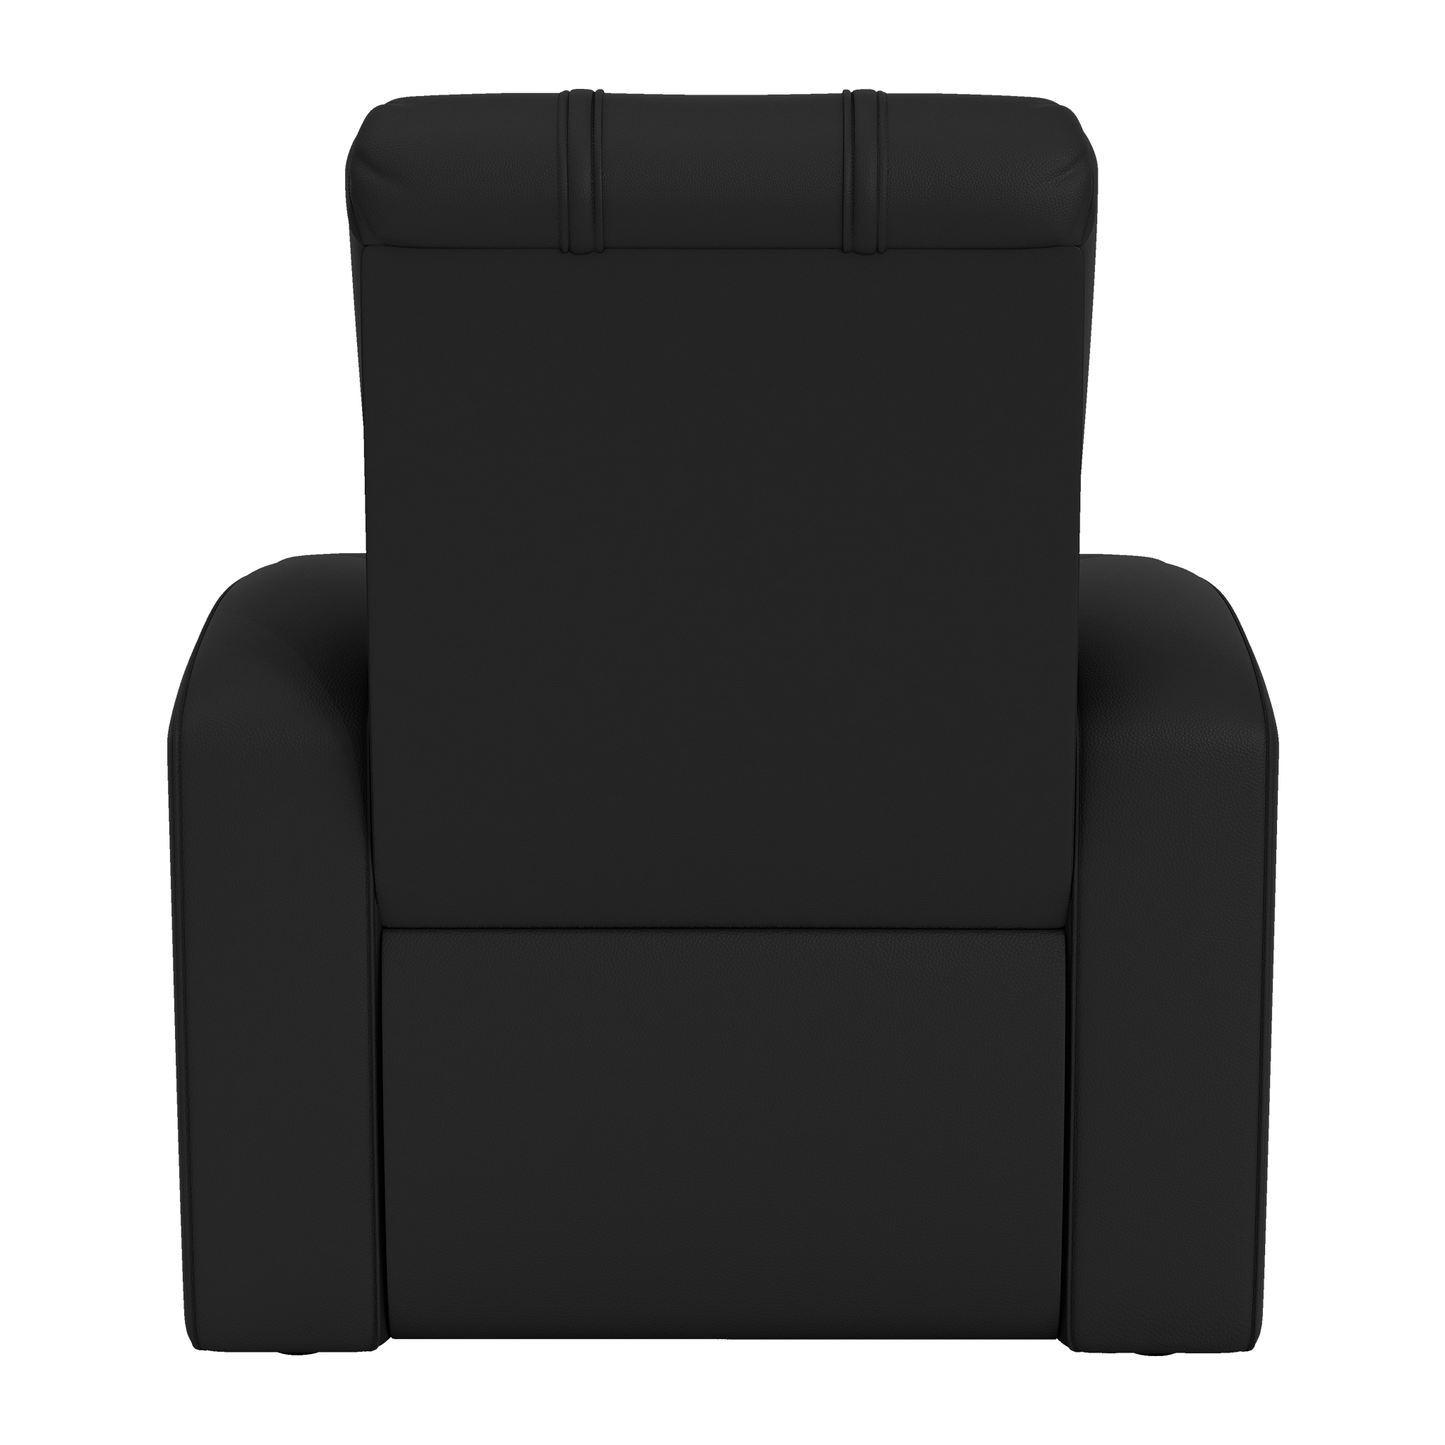 Relax Home Theater Recliner with San Diego State Alternate